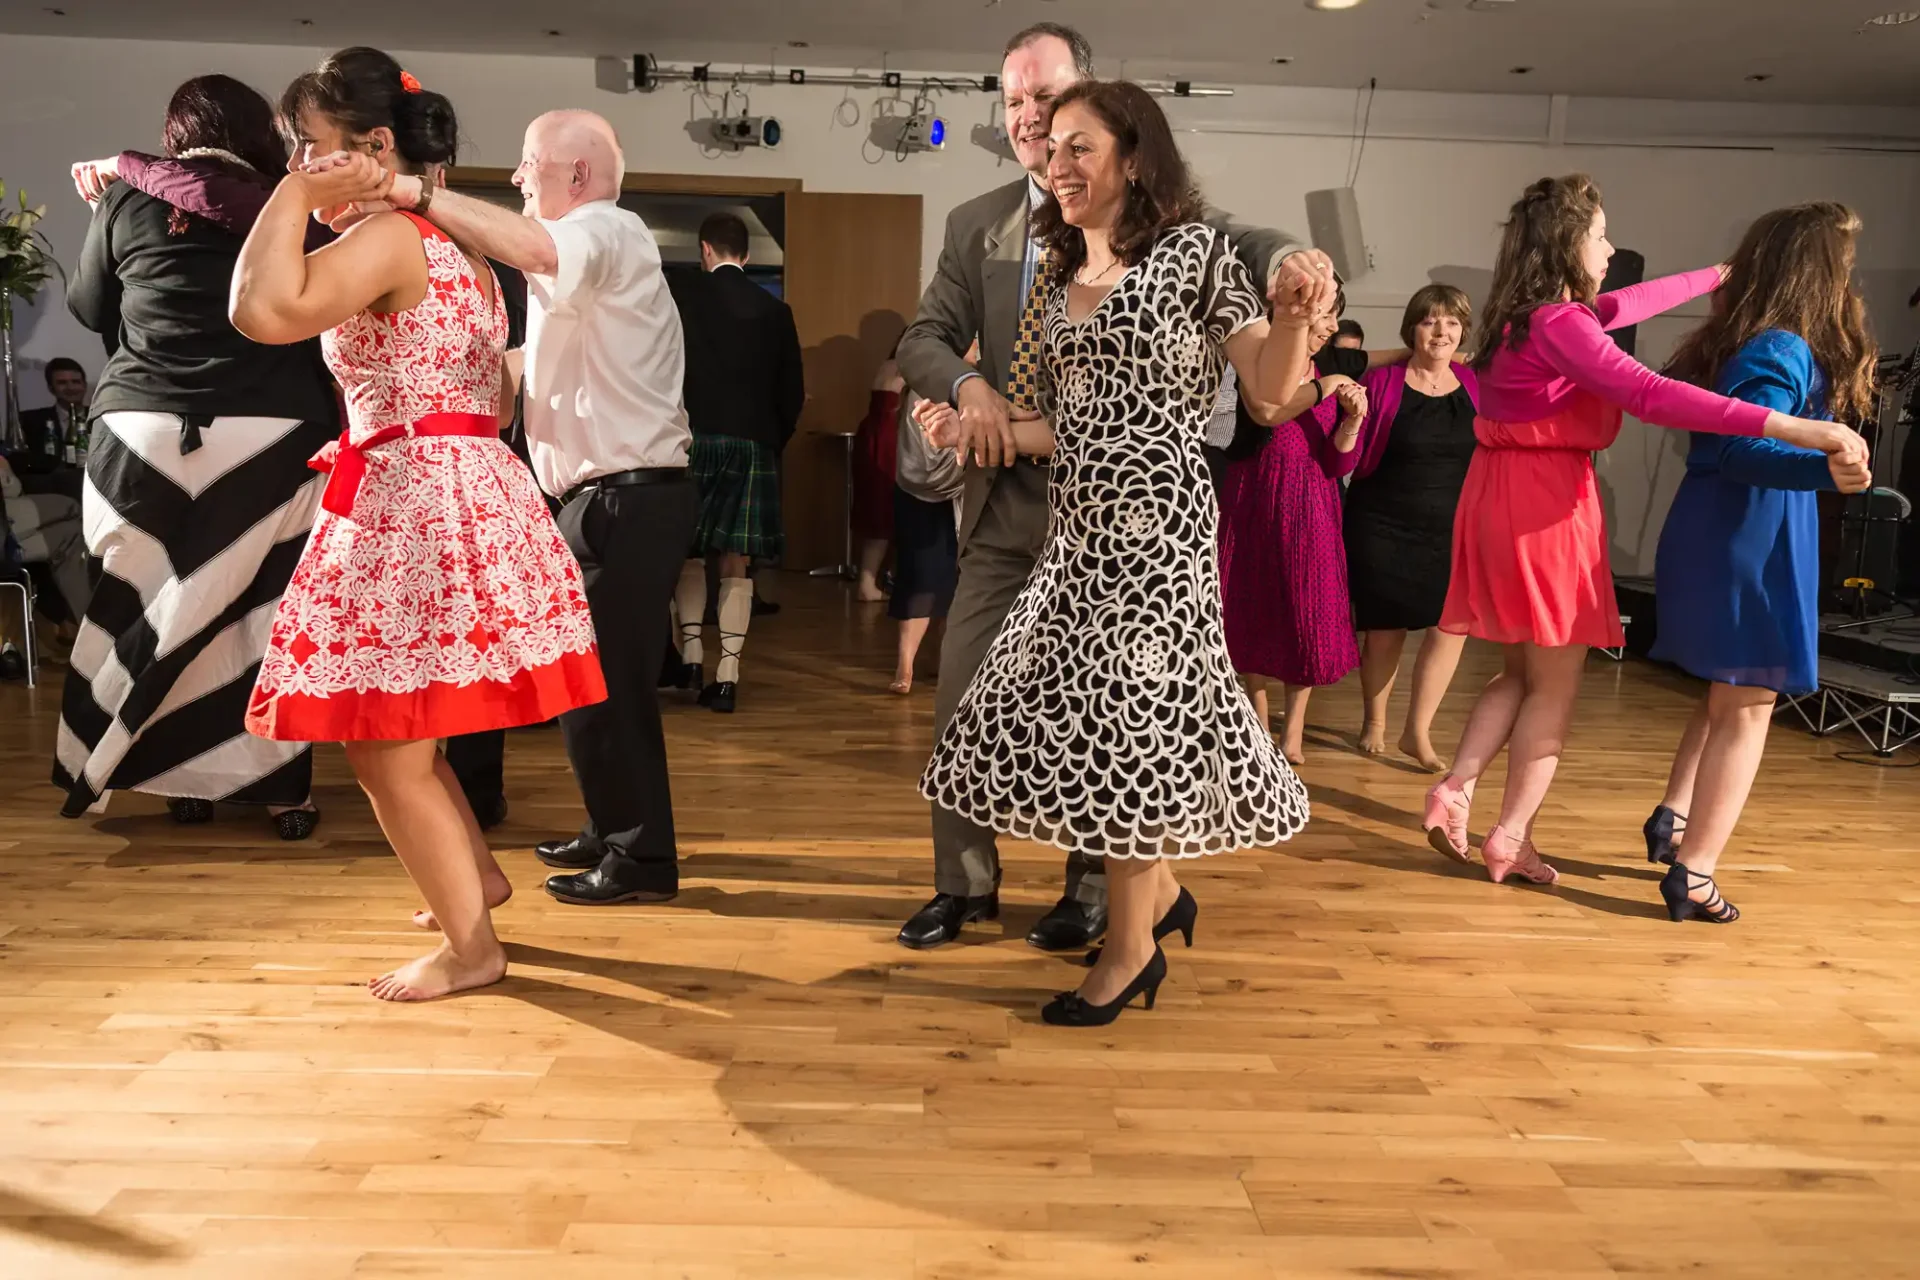 People of various ages joyfully dancing in pairs at an indoor event with a wooden floor.